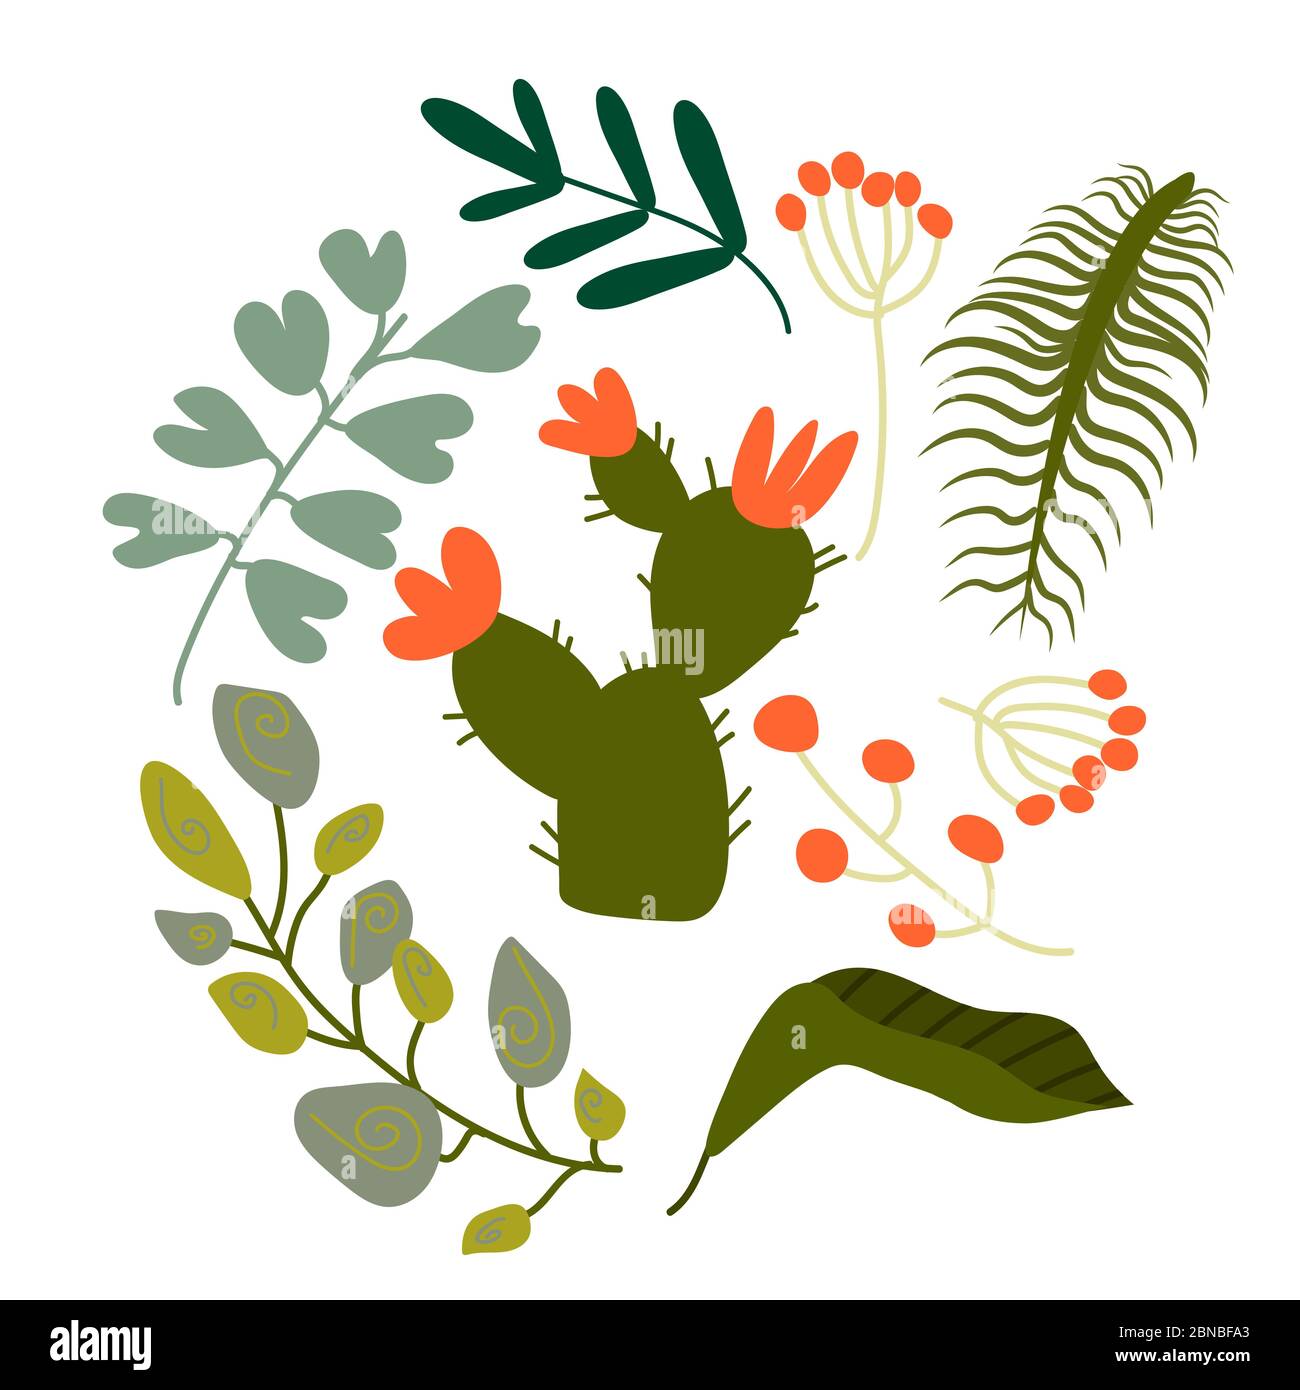 Pattern set of a lot of different green tropical exotic leaves, plants with long branches and flowers on white background. Collection of completed and Stock Vector